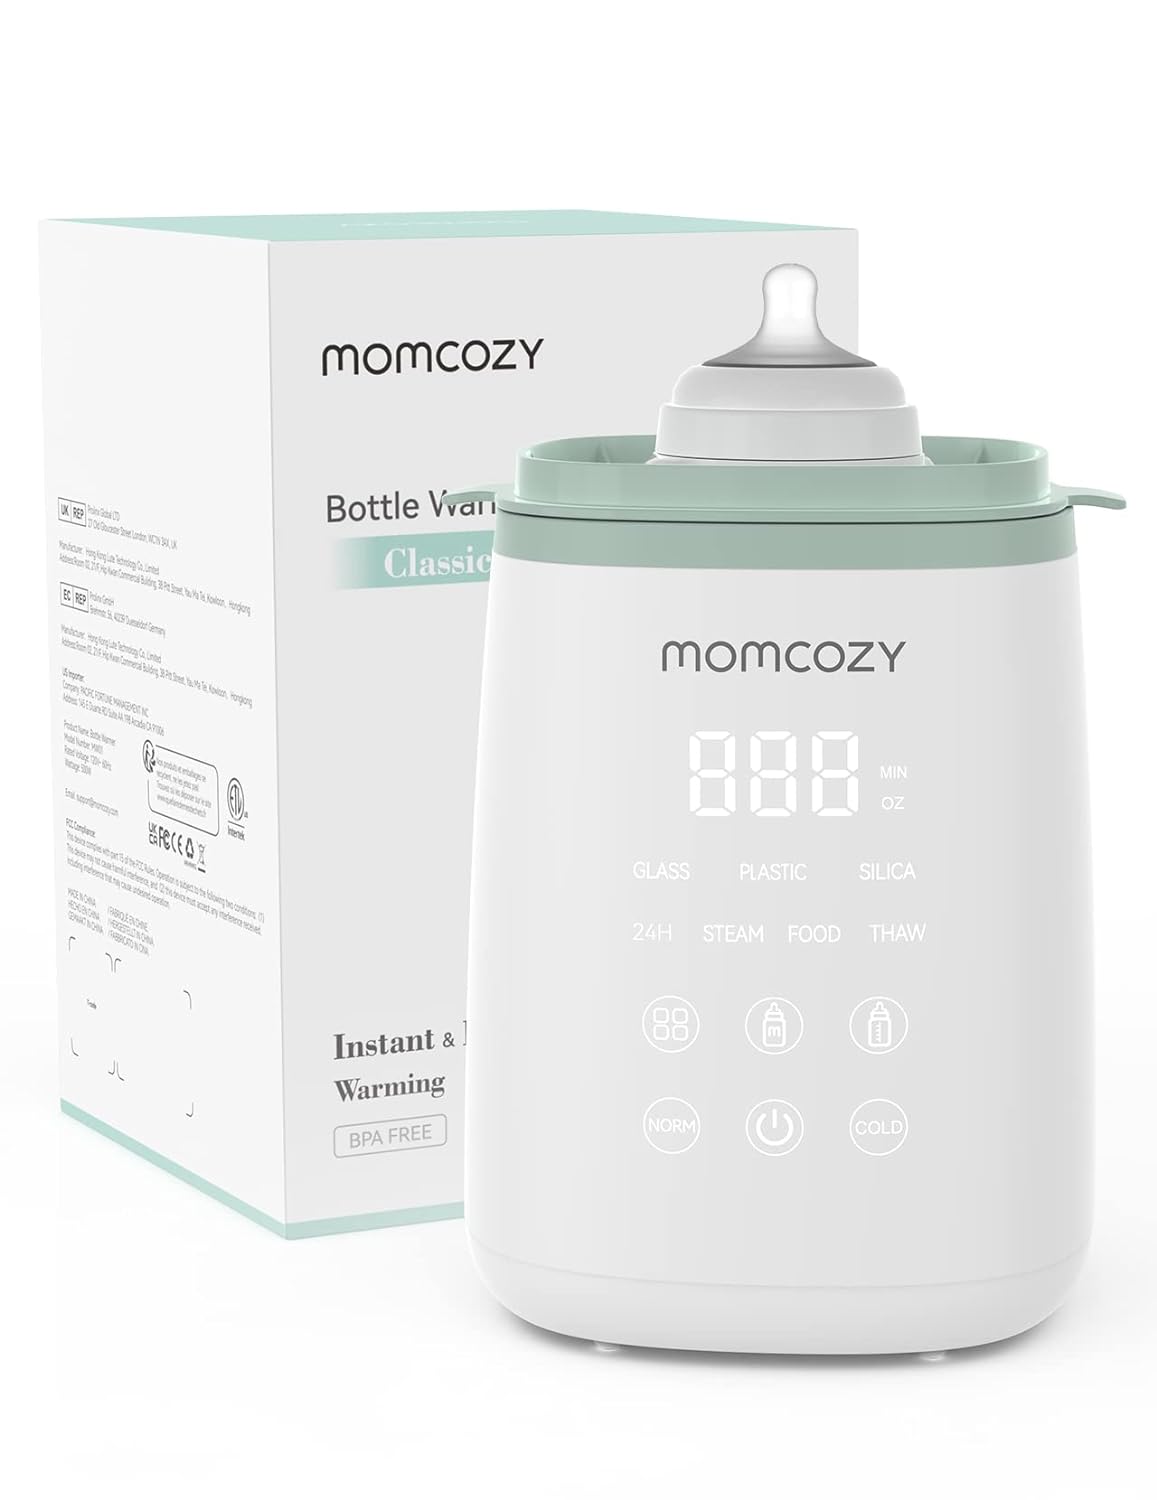 Limited-Time Offer: Momcozy Bottle Warmer, Fast and Accurate Temperature Control - Save 47%!